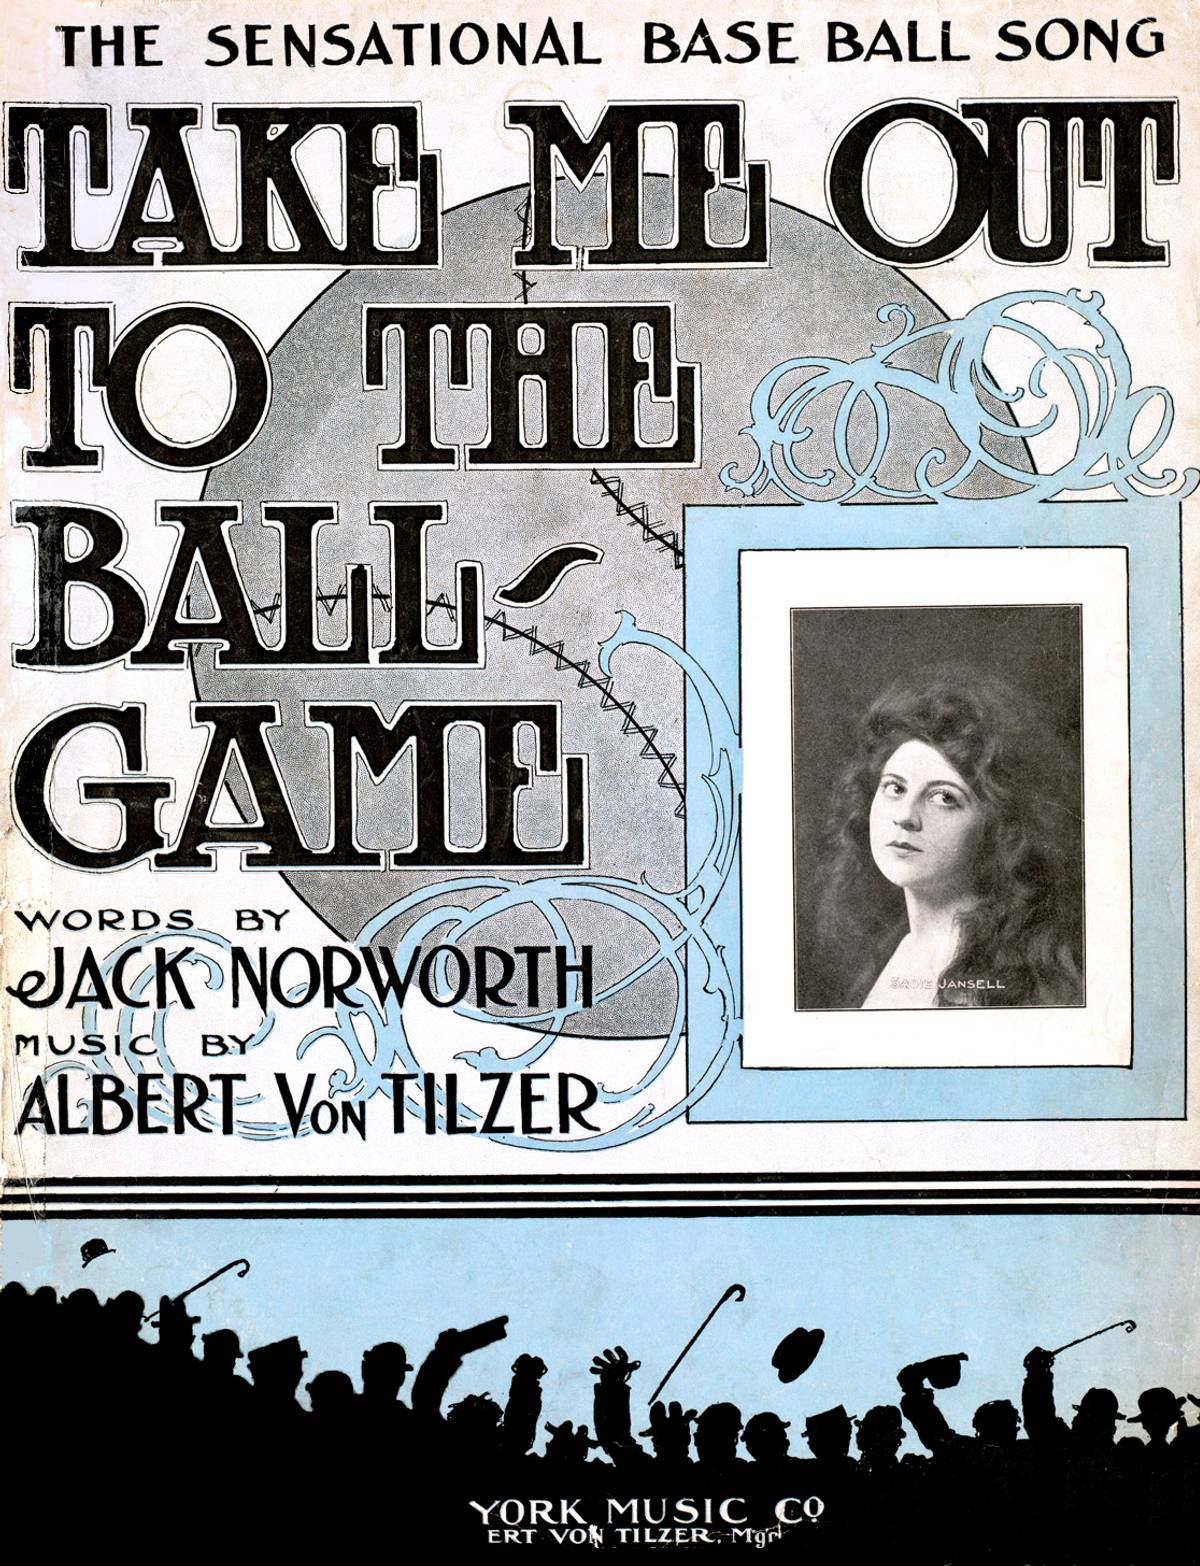 Cover of sheet music for ‘Take Me Out to the Ball Game’